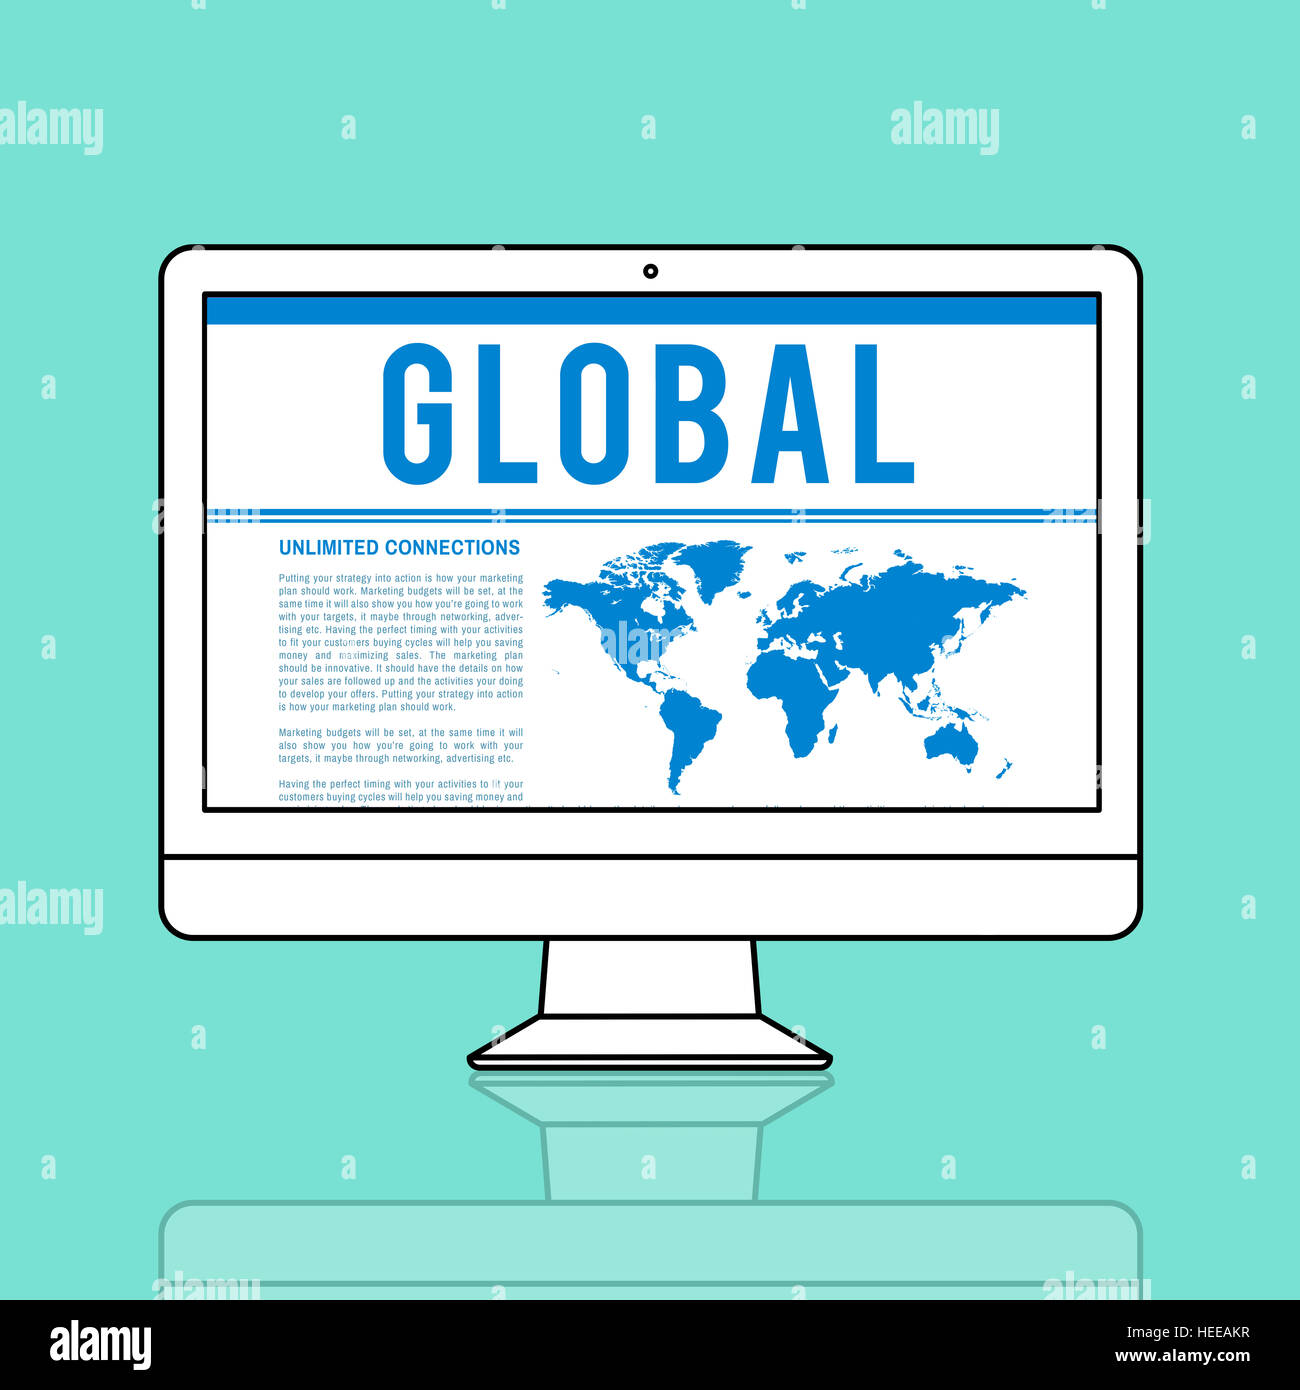 Global Communications Connection Social Networking World Map Concept Stock Photo